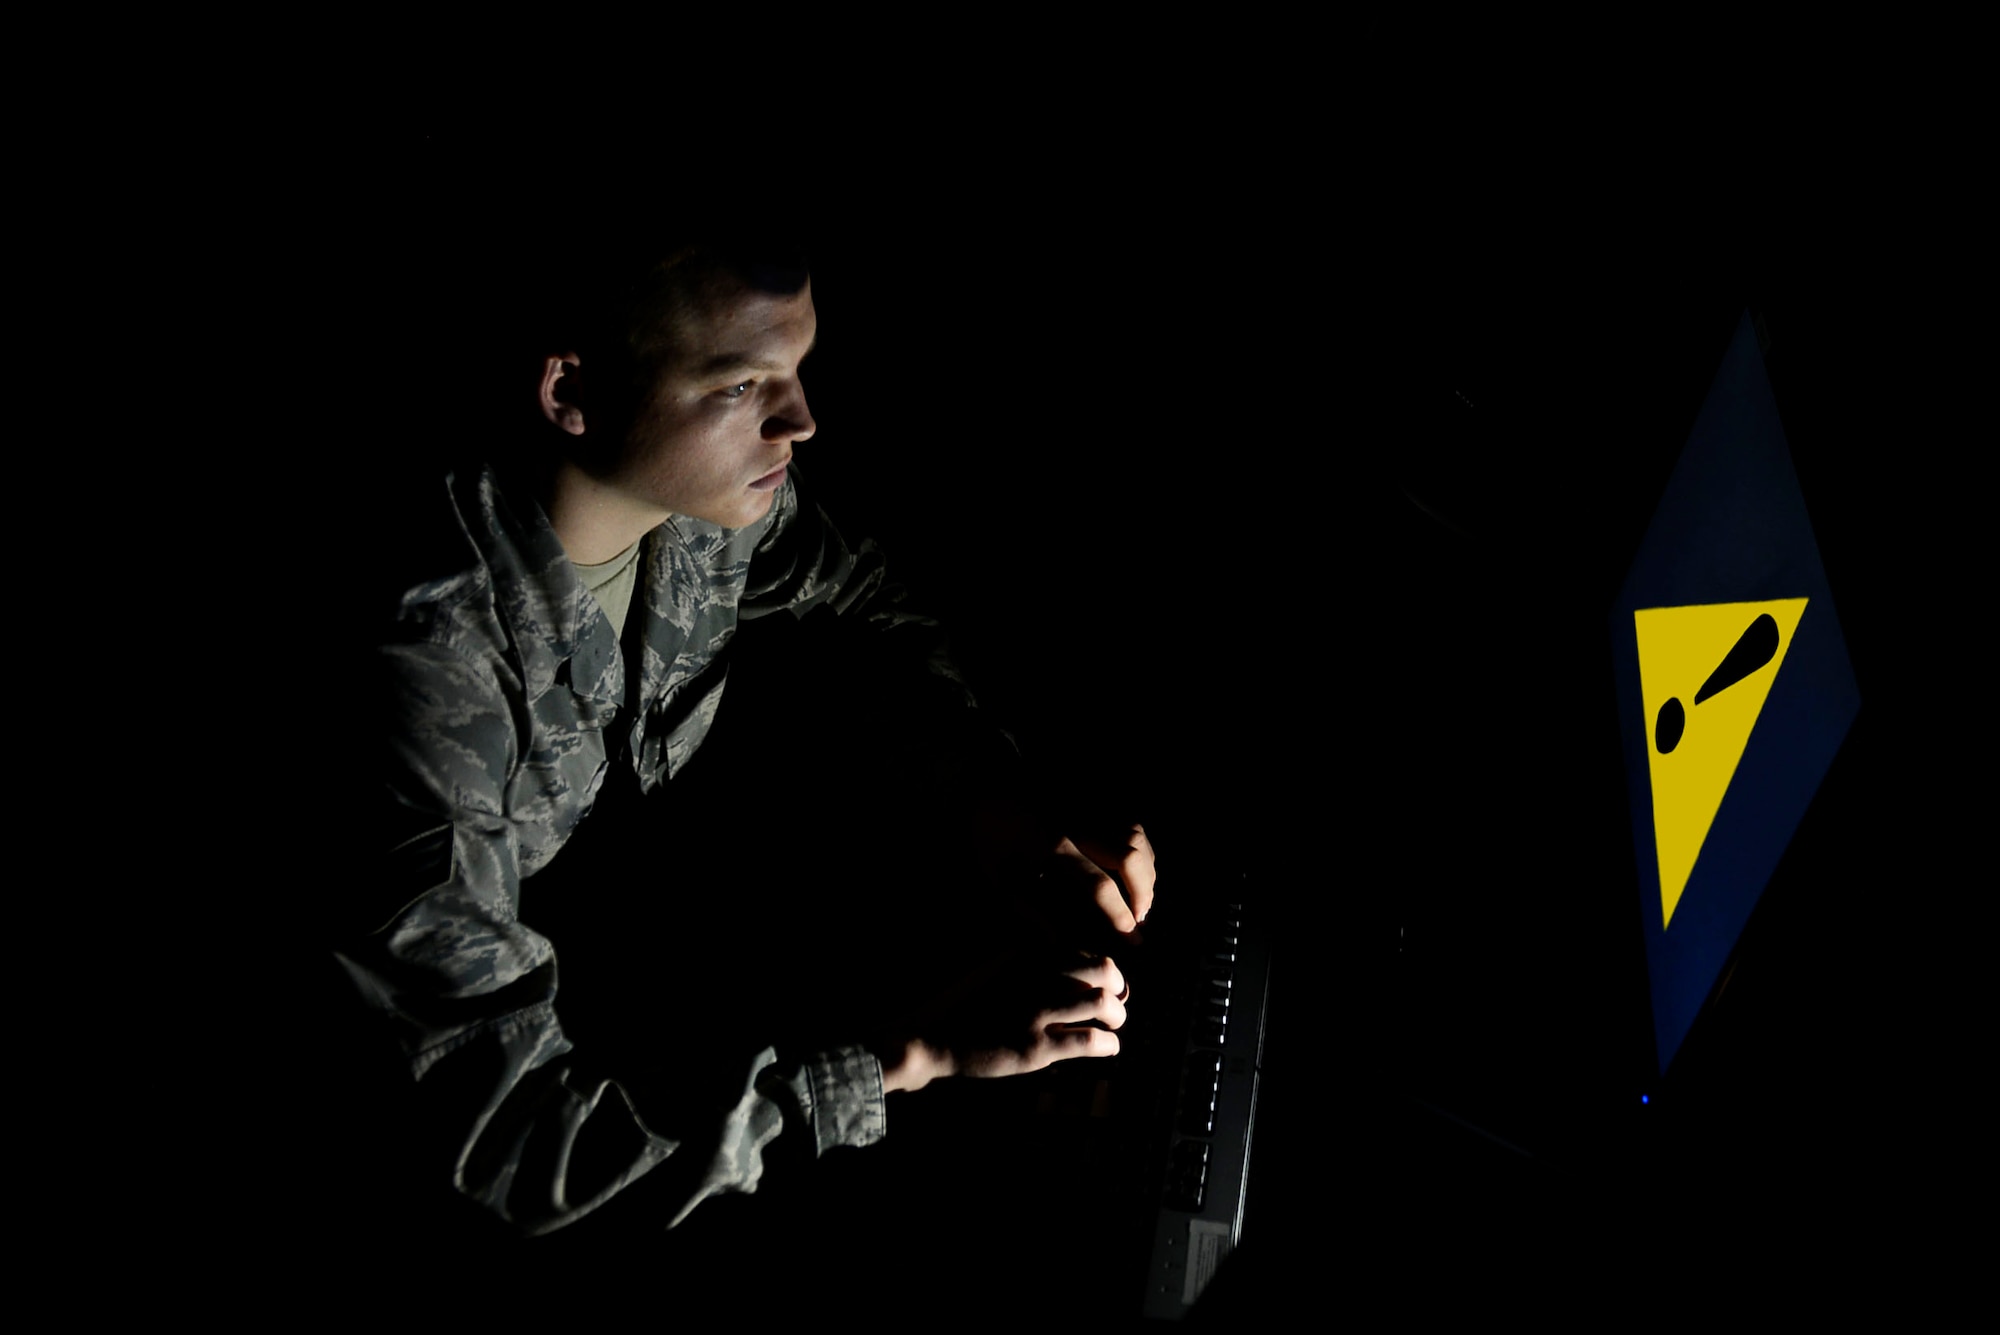 Ensuring that the U.S. Air Force’s cyber assets and our personally identifiable information remain safe and out of the wrong hands is one of the many responsibilities that we, as Airmen, must take seriously. Cyber threats are most commonly a result of negligence and carelessness in taking care of information. (U.S. Air Force illustration by Airman 1st Class Christopher Maldonado)